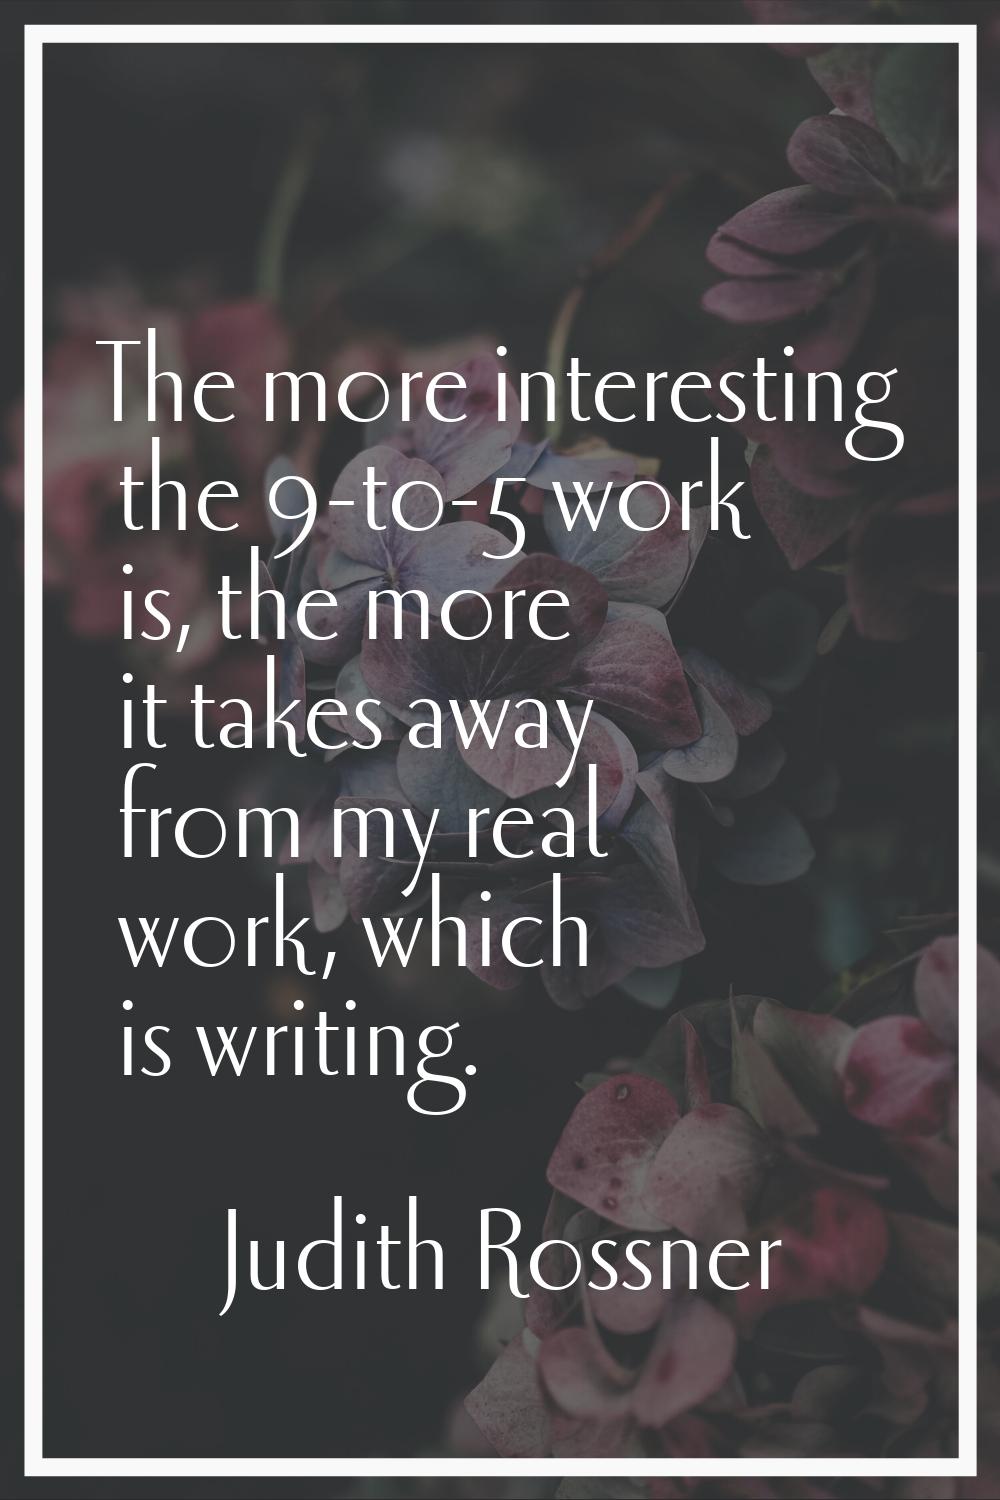 The more interesting the 9-to-5 work is, the more it takes away from my real work, which is writing